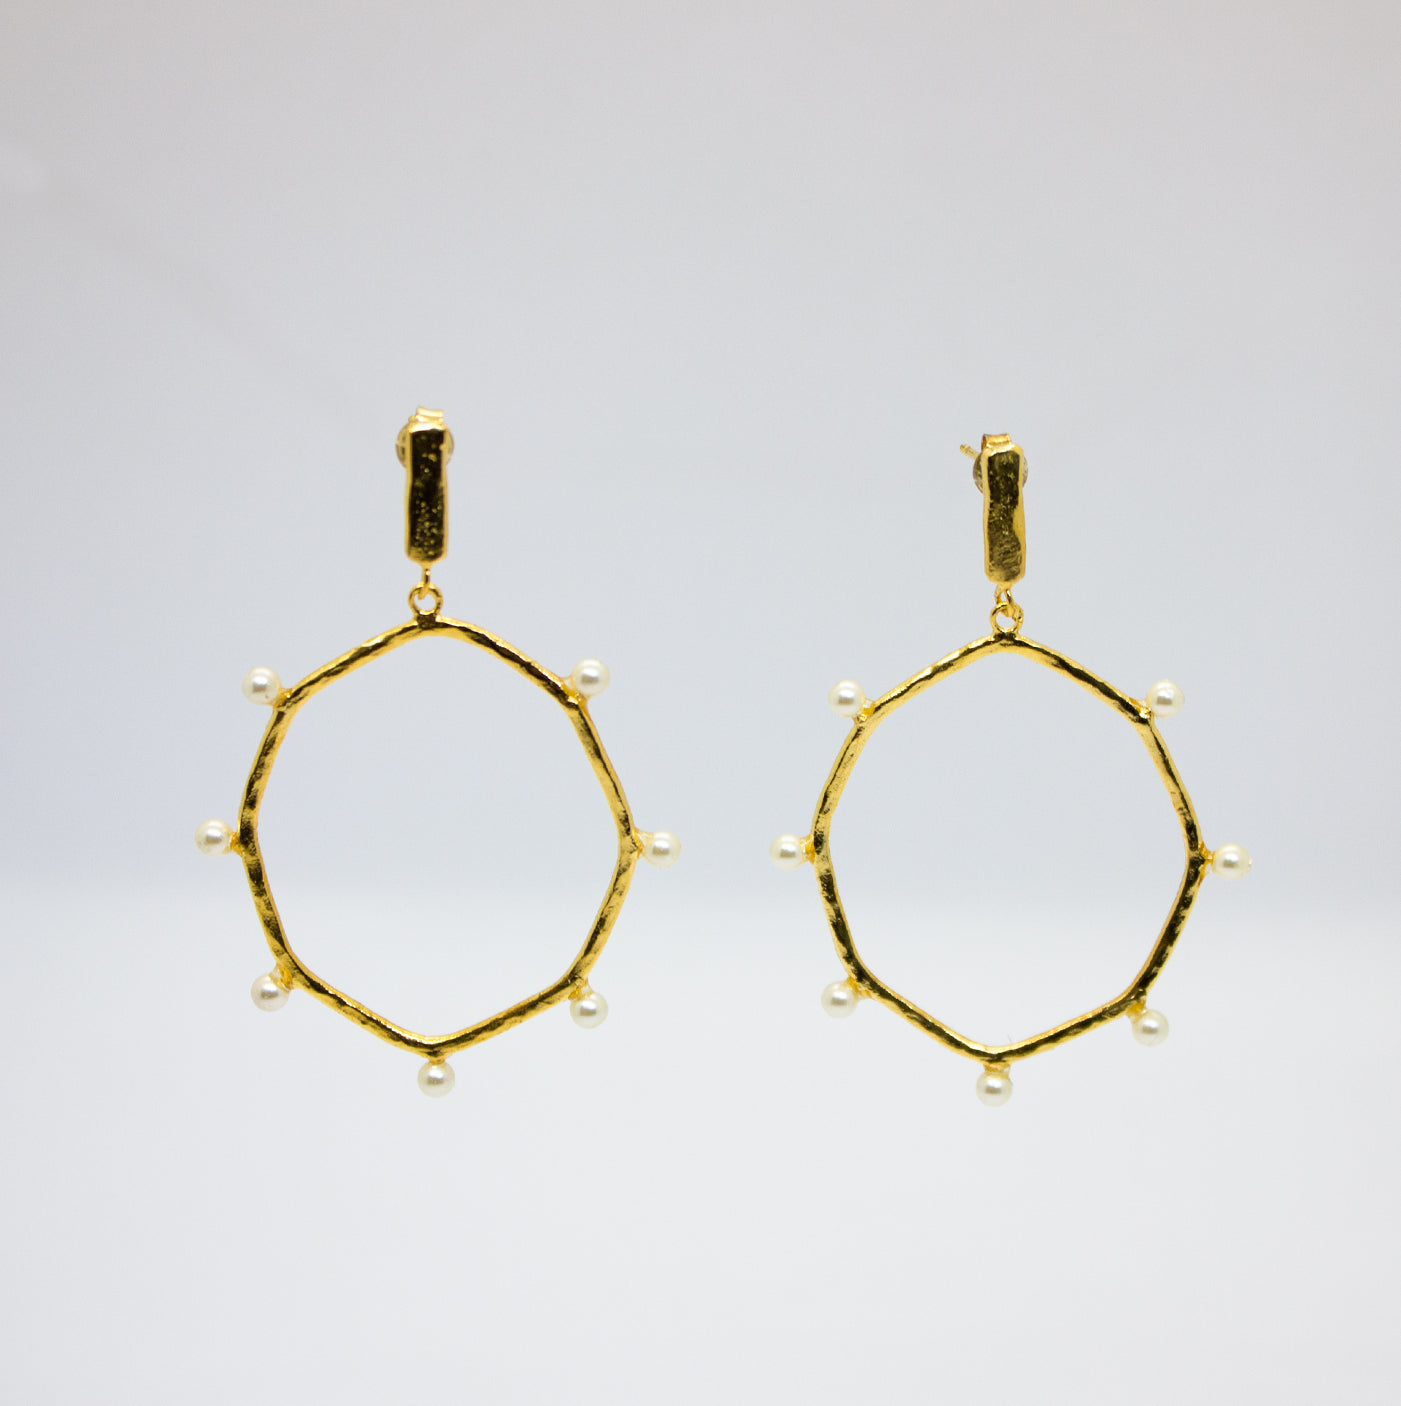 Earrings with Oval Hoops and Small Pearls